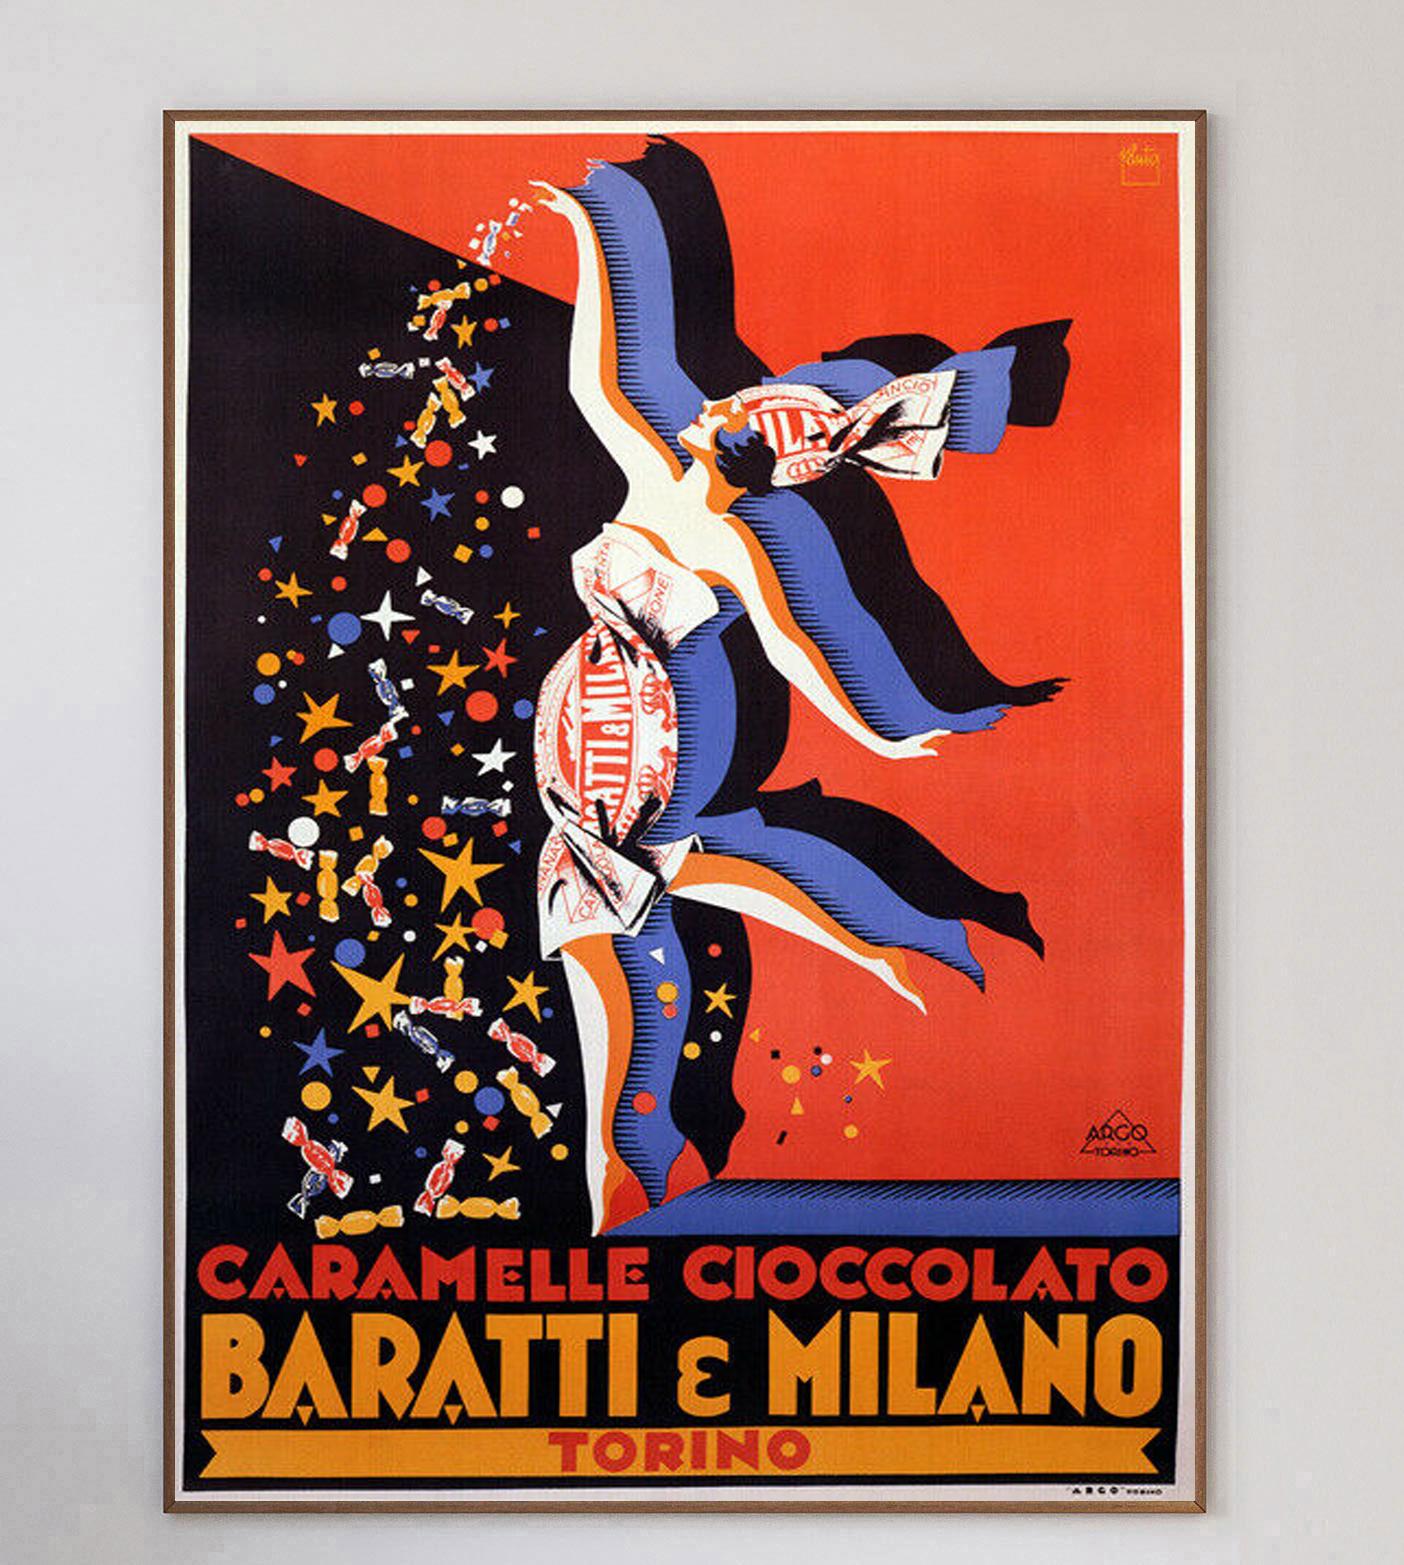 Going on to become one of the most recognisable names in Italian confectionary, Baratti e Milano was founded in 1858 when they first opened their shop in Turin (Torino).

This beautiful Art Deco design showing a woman showering confectionary down